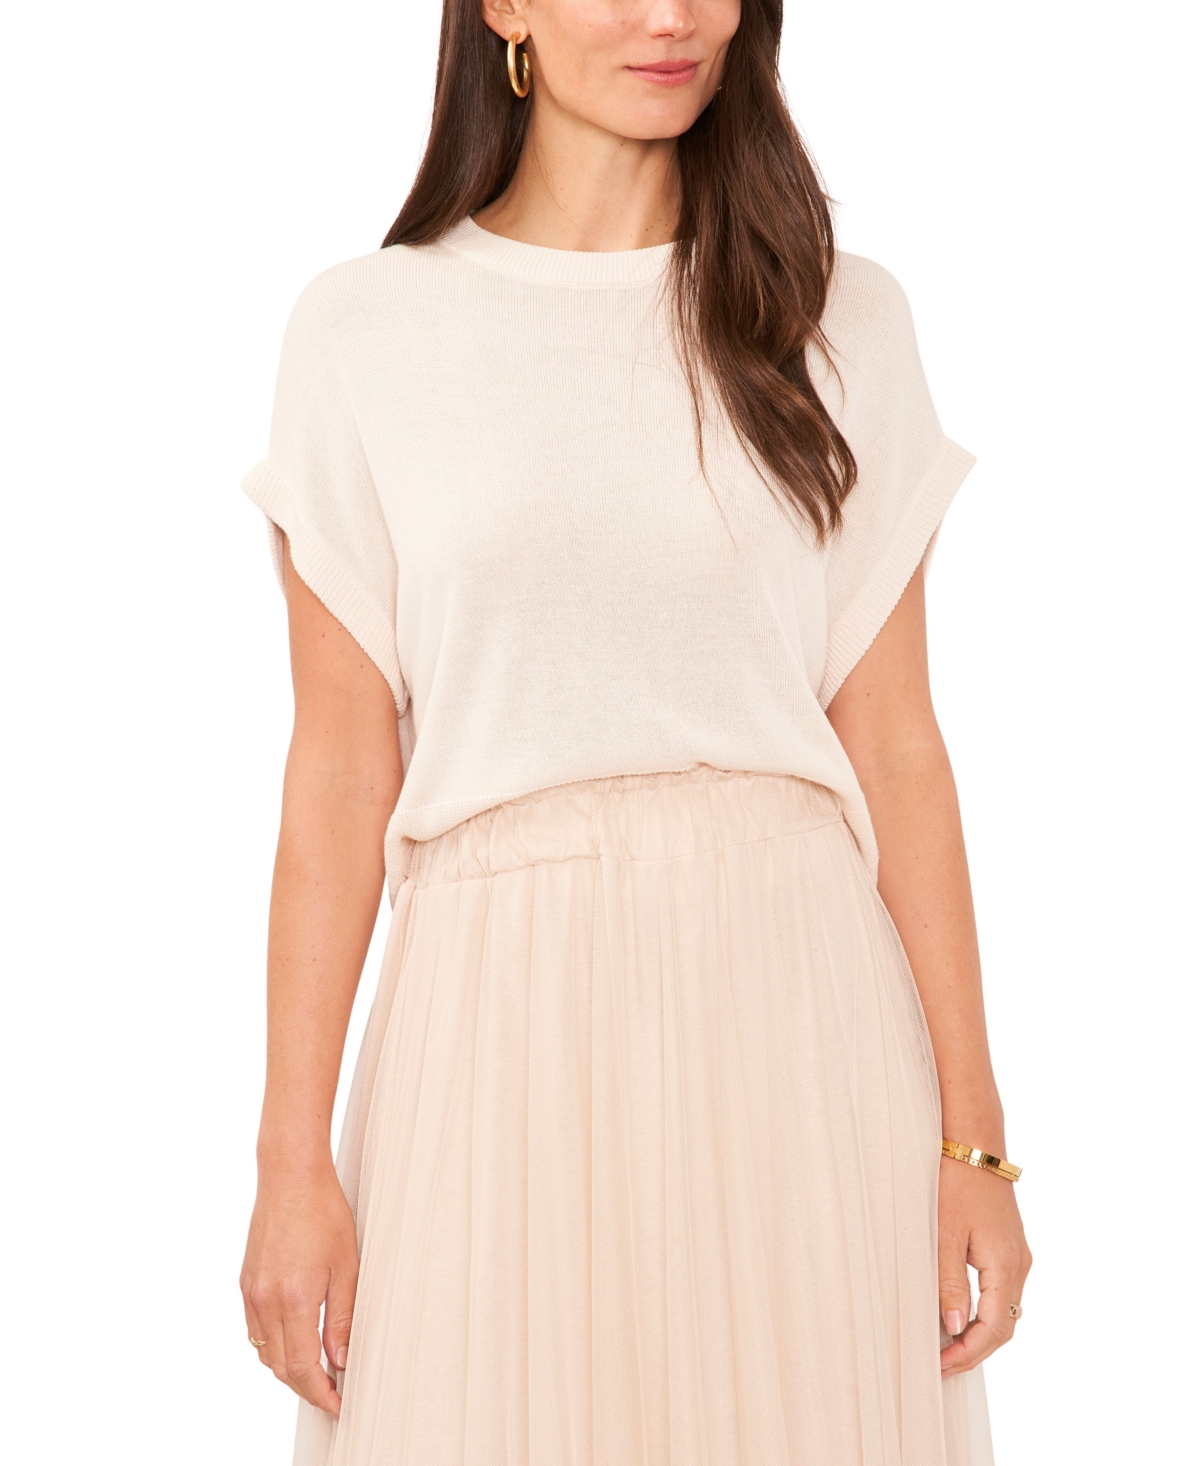 Vince Camuto Women's Drop-shoulder Short-sleeve Sweater In Soft Blush